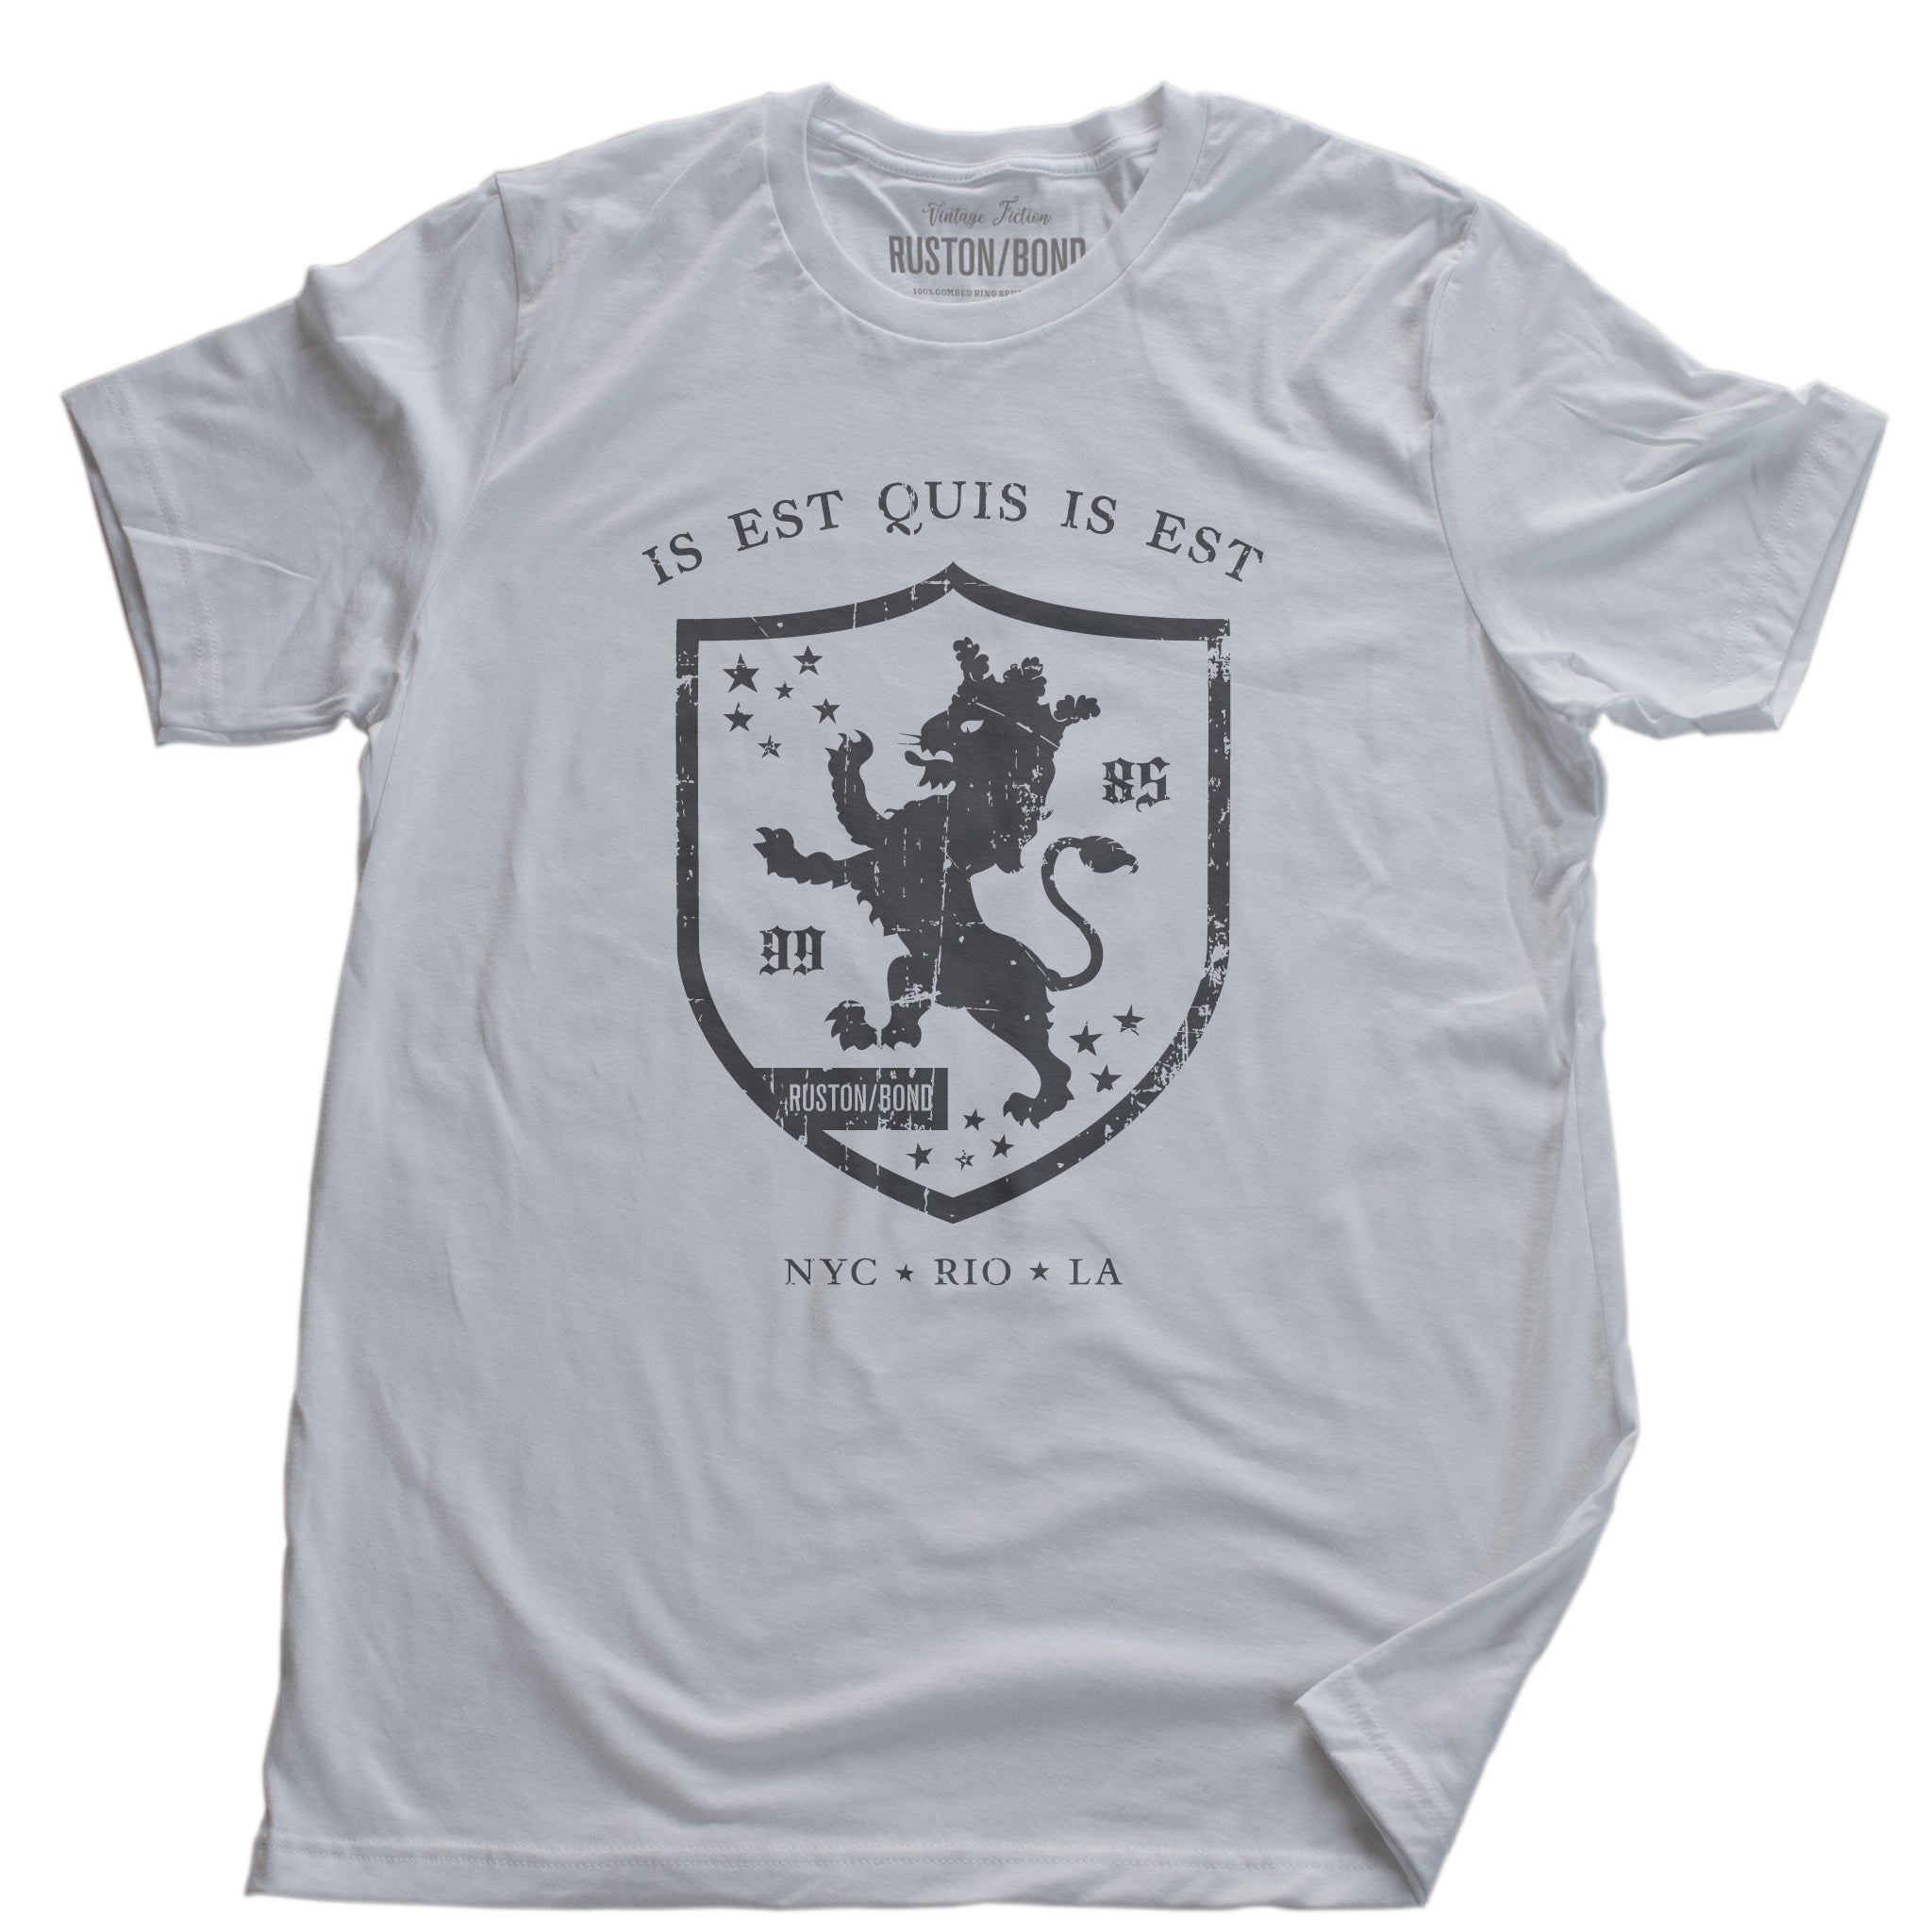 A retro, vintage-inspired fashion t-shirt in Classic White, with an medieval graphic of a lion within a shield,surrounded by the sarcastic text in Latin “it is what it is,” and New York, Rio, Los Angeles at the bottom. By fashion brand Ruston/Bond, from wolfsaint.net